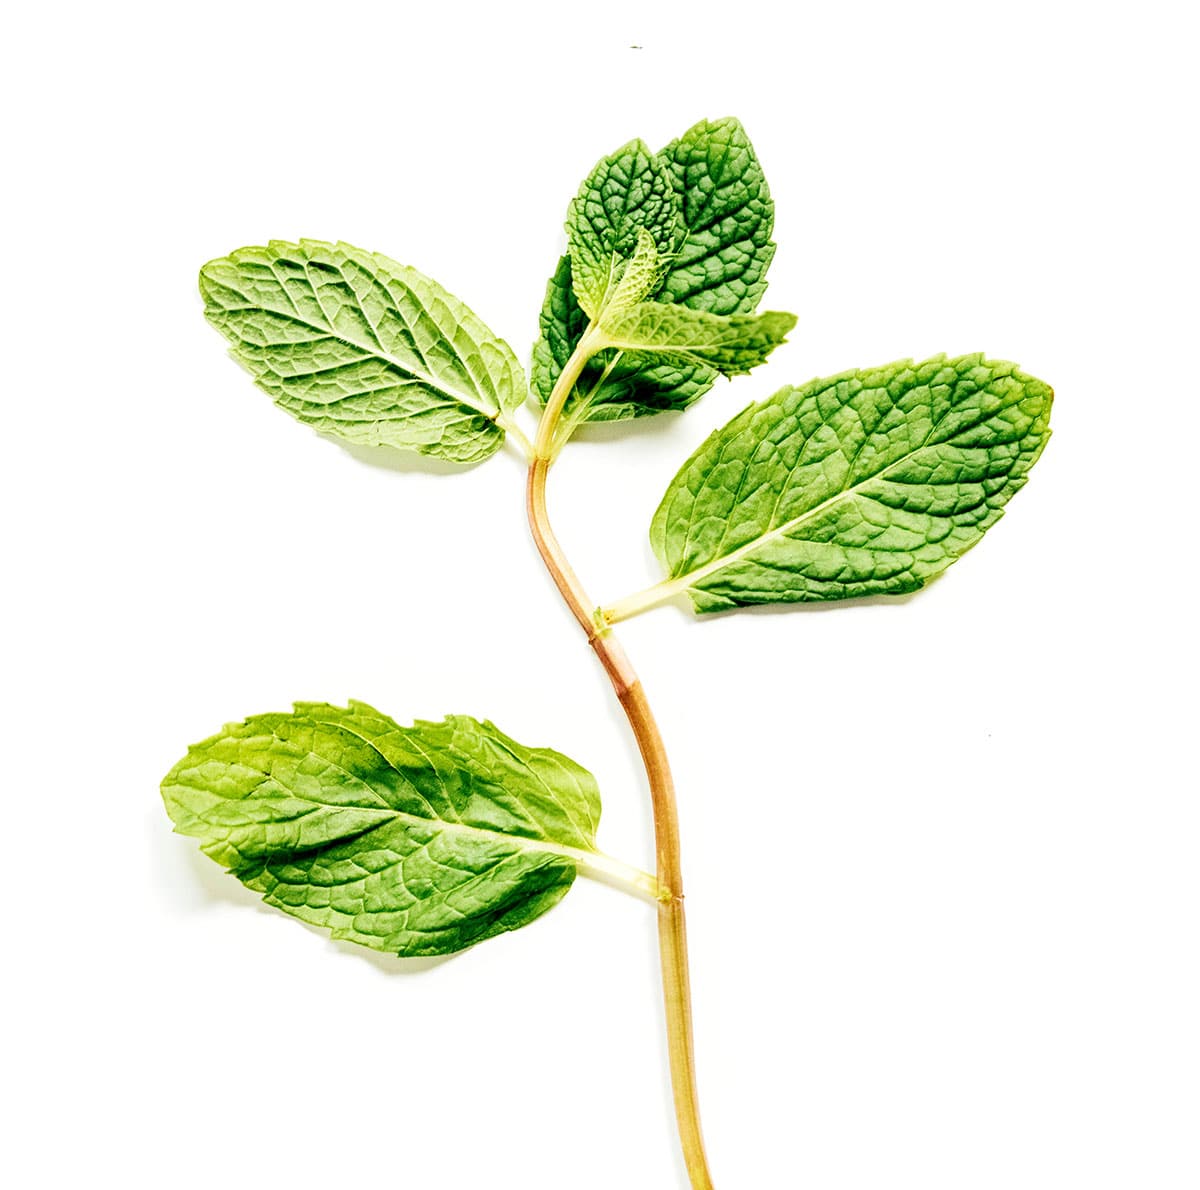 Mint leaves on a white background.